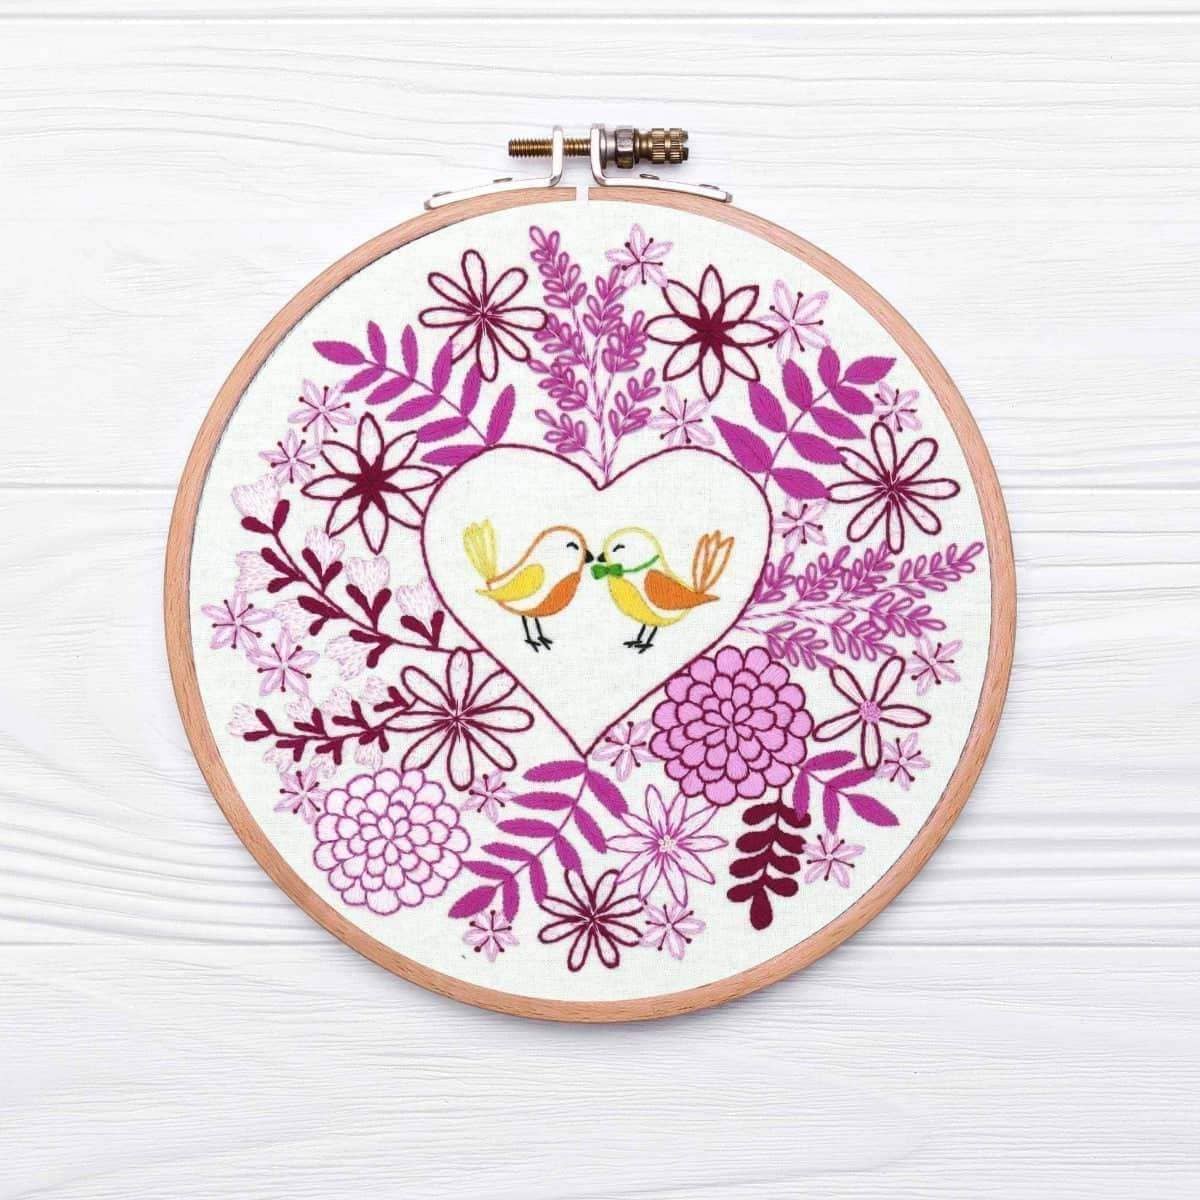 Love Blooms hand Embroidery Kit , Embroidery Kit , StitchDoodles , Embroidery, embroidery hoop, embroidery hoop kit, embroidery kit for adults, embroidery kit for beginers, embroidery kits for beginners, embroidery pattern, hand embroidery, hand embroidery fabric, hand embroidery seat frame, nurge embroidery hoop, PDF pattern, pre-printed fabric, Printed Pattern , StitchDoodles , shop.stitchdoodles.com